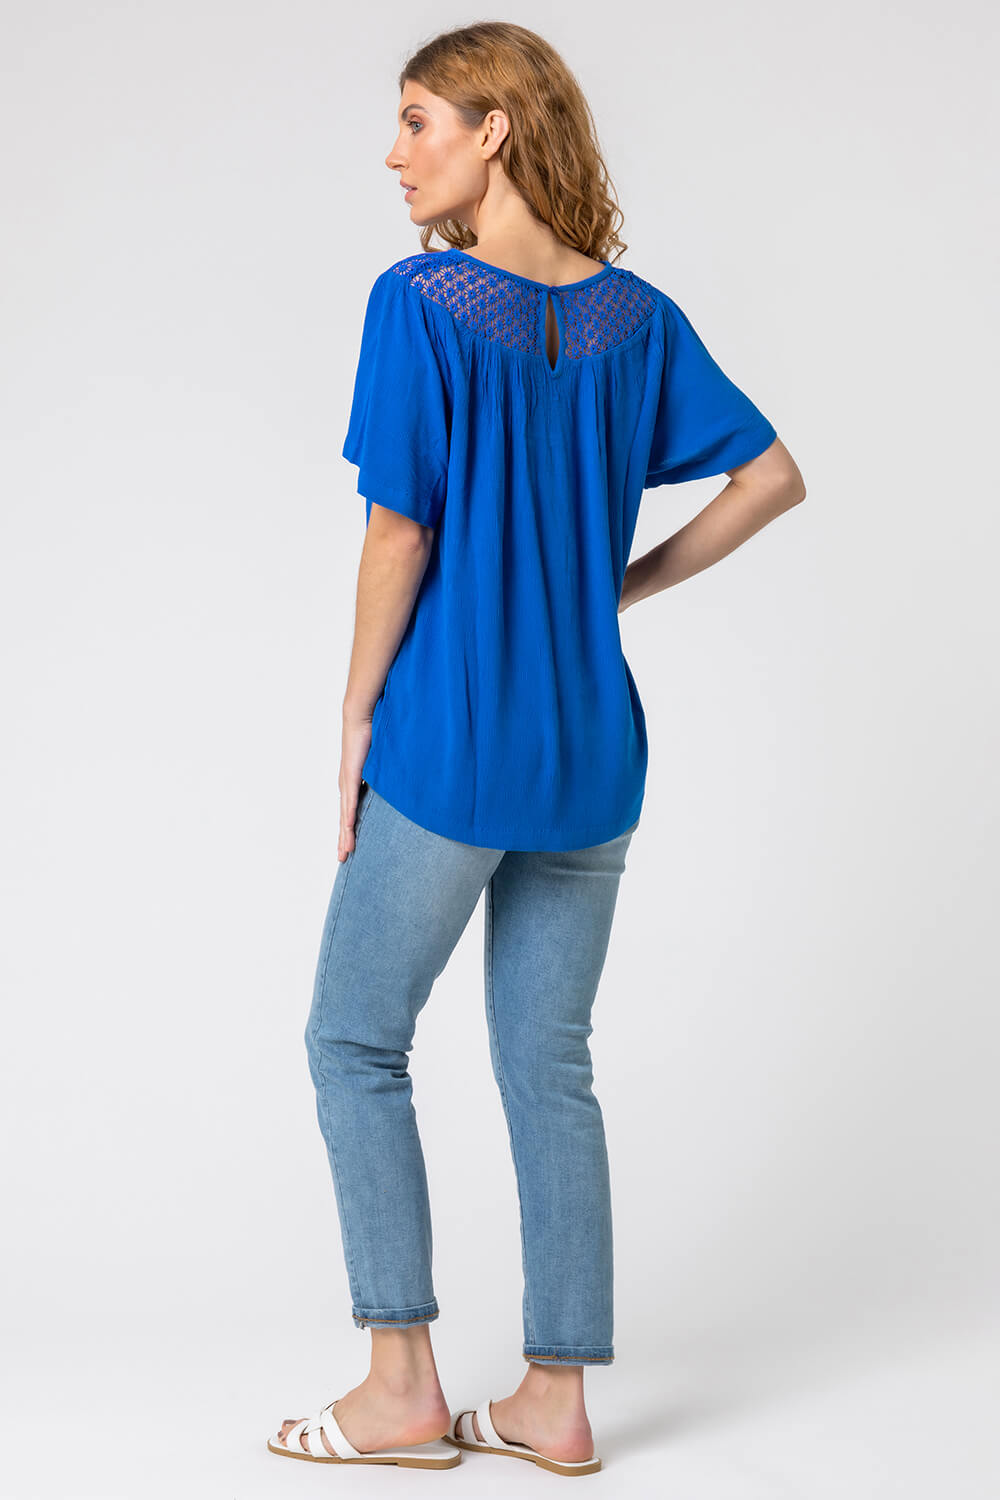 Royal Blue Lace Panel Tunic Top, Image 2 of 5